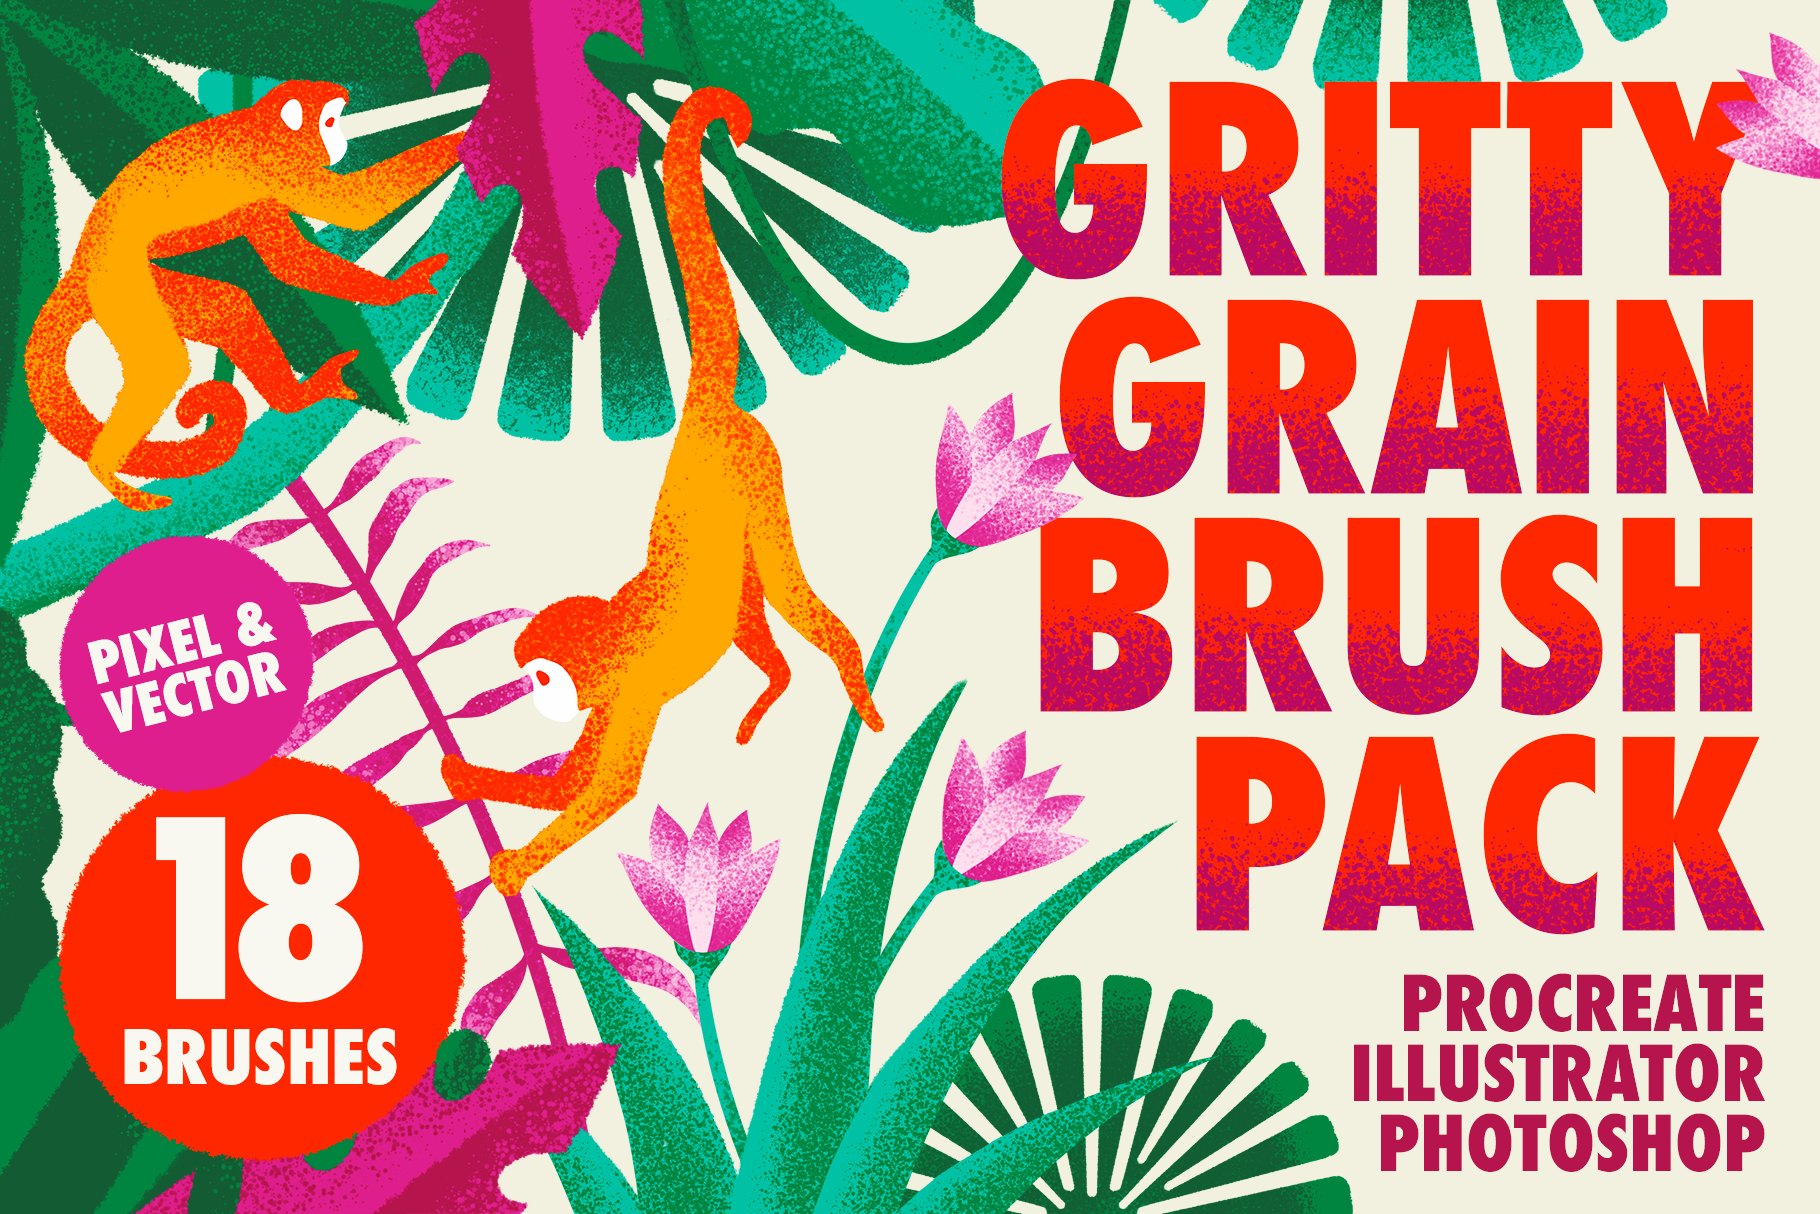 Gritty Grain Brushes Pack - Shaderscover image.